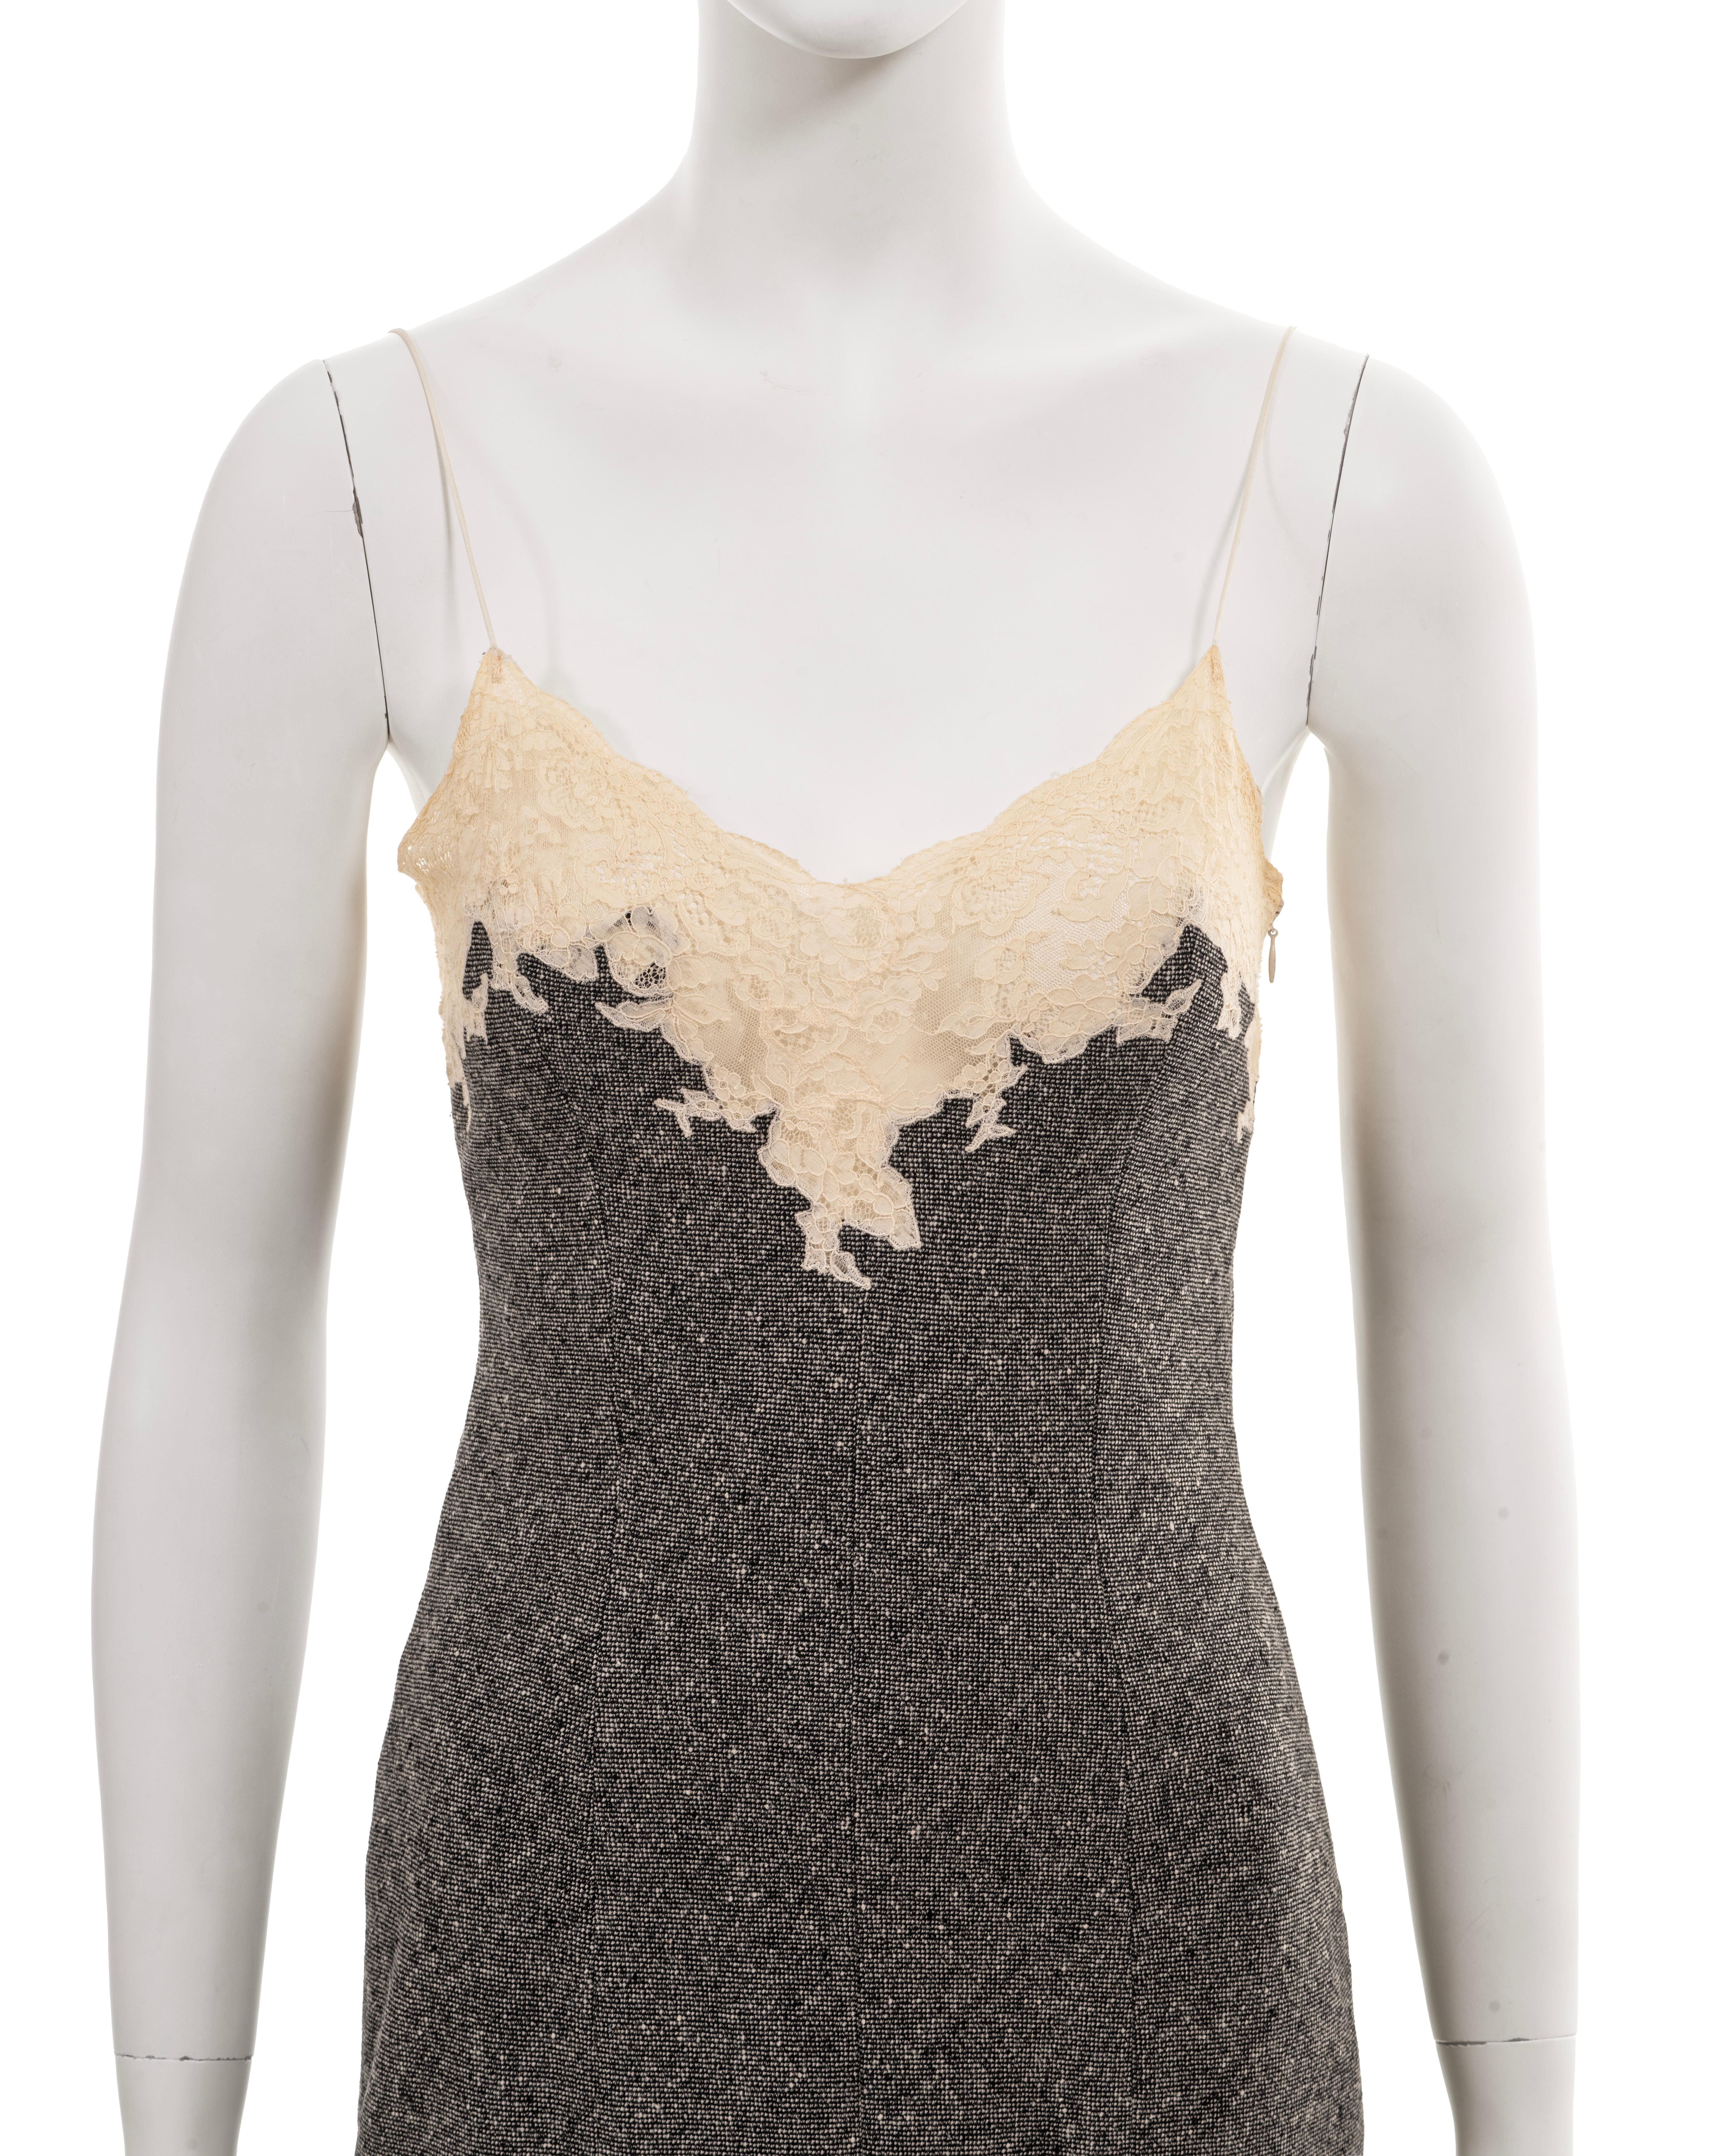 Christian Dior by John Galliano grey tweed slip dress with lace trim, fw 1998 In Excellent Condition For Sale In London, GB